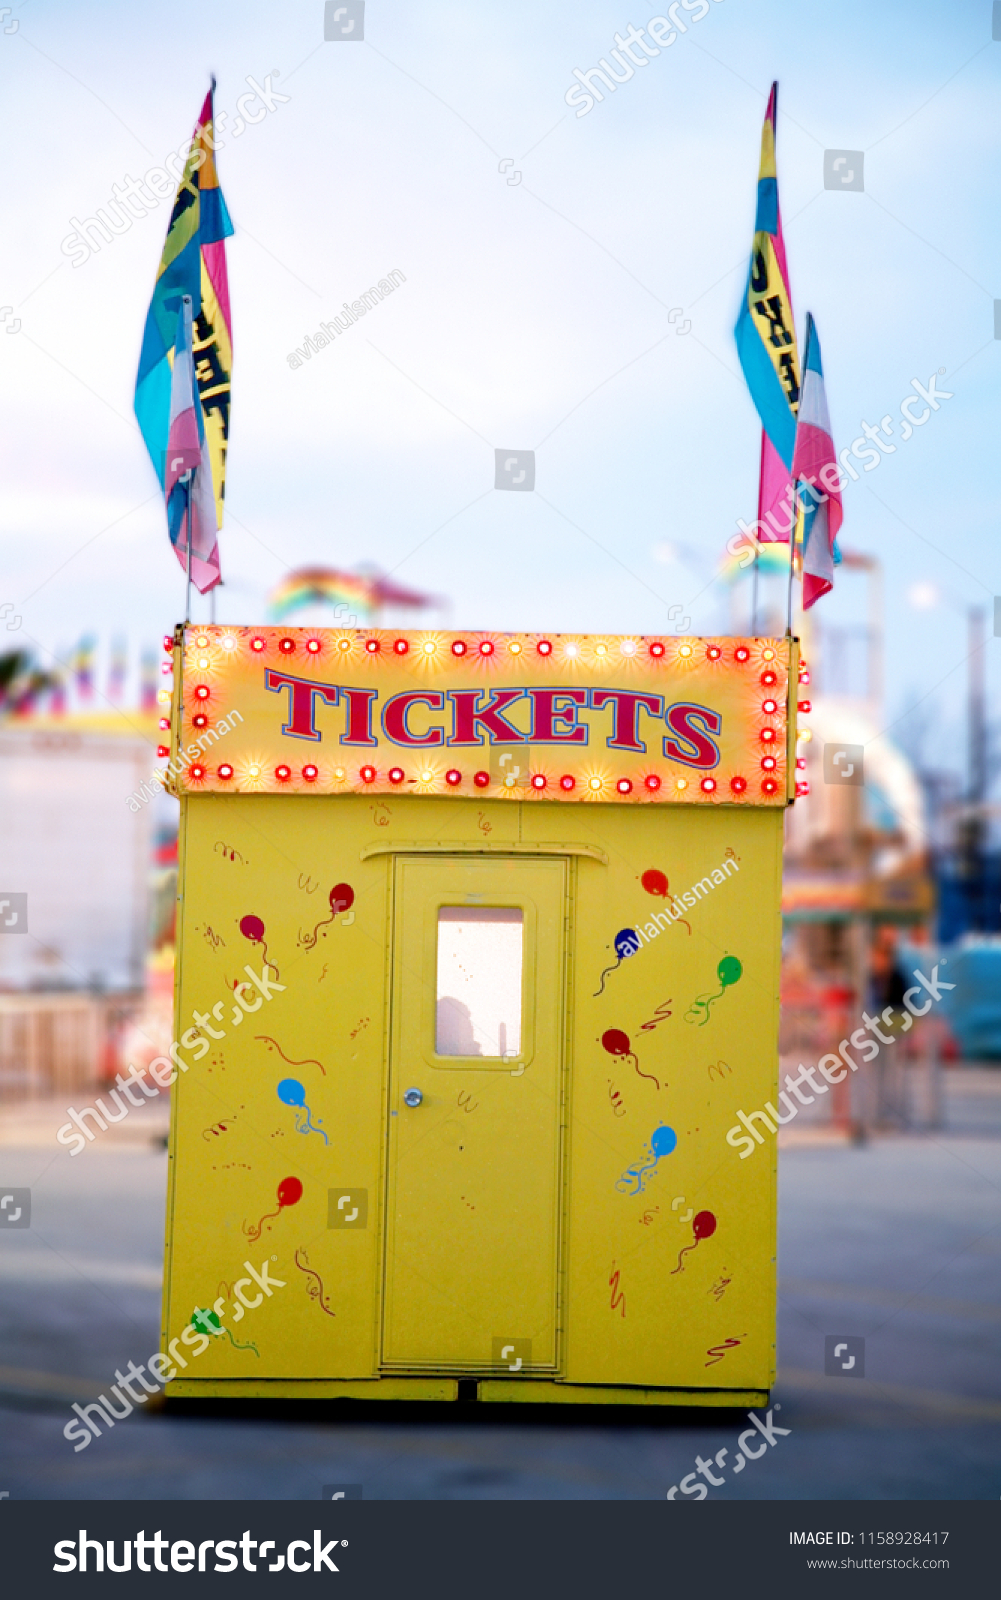 1,163 Fair ticket booth Stock Photos, Images & Photography Shutterstock